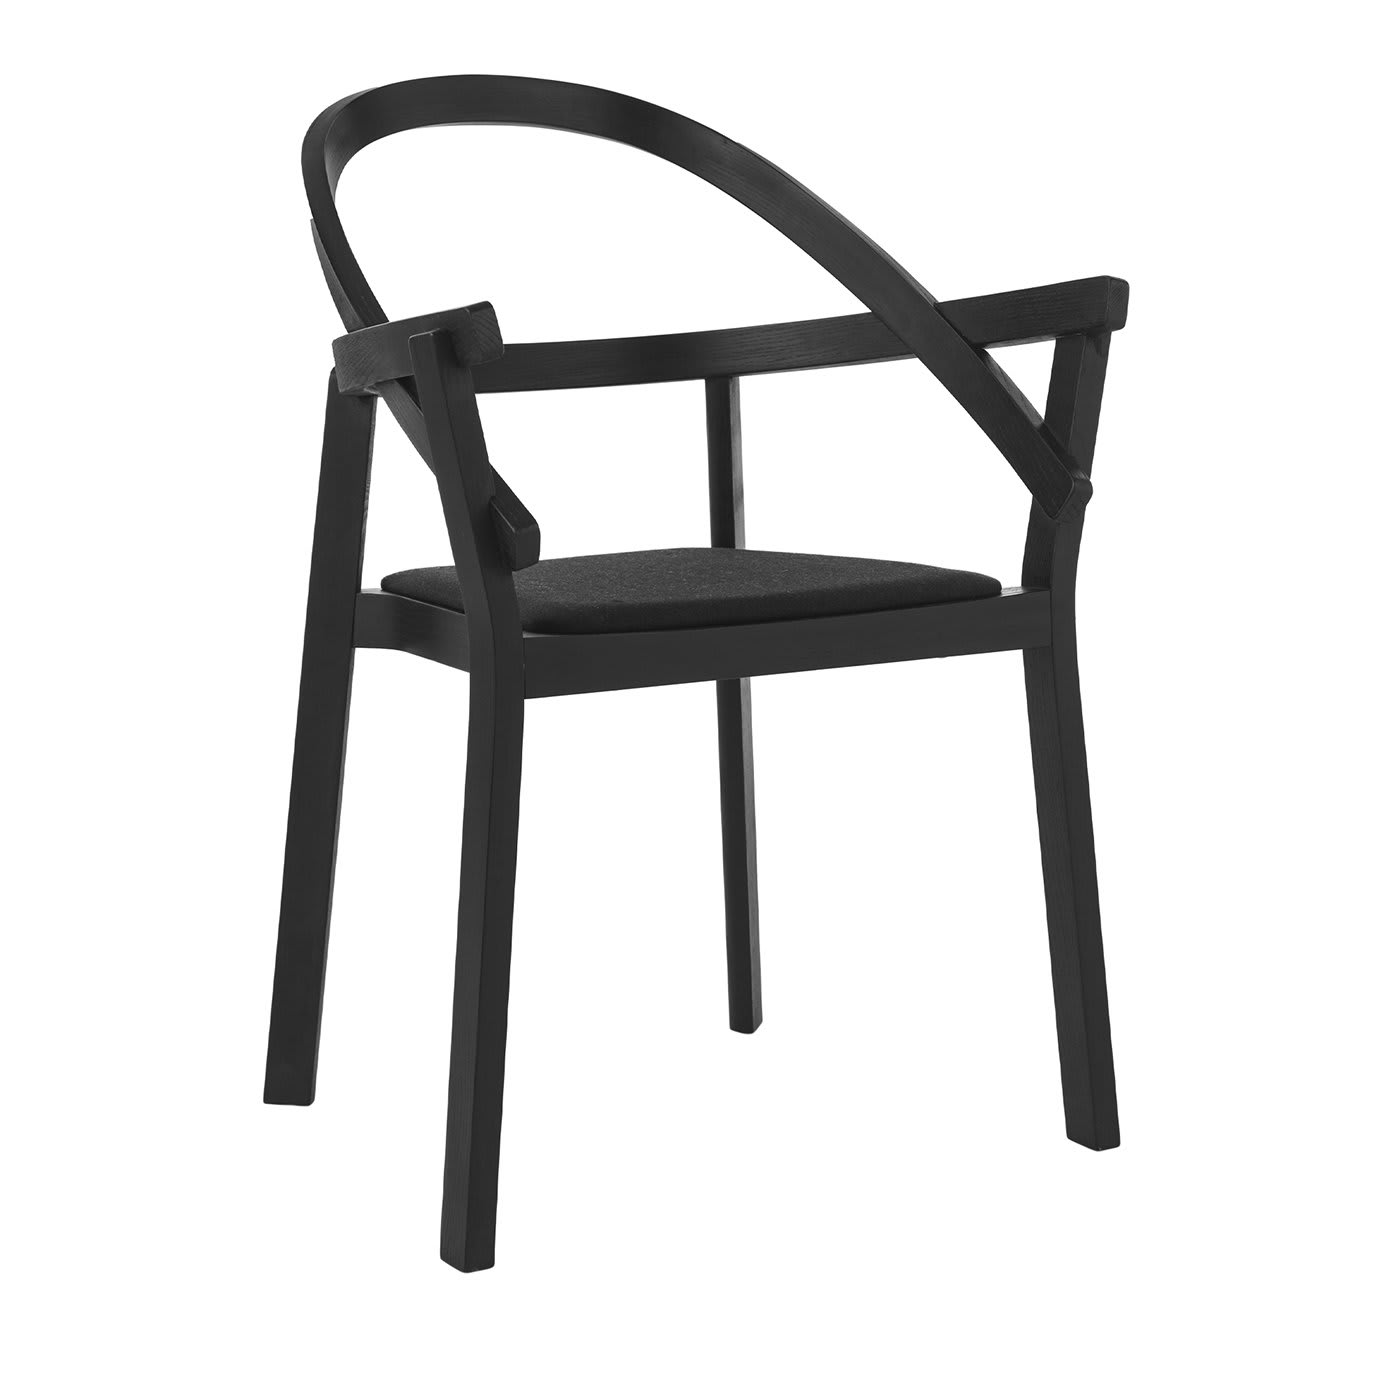 Baci Black Ash Dining chair with Black Upholstered Seat - Passoni Design